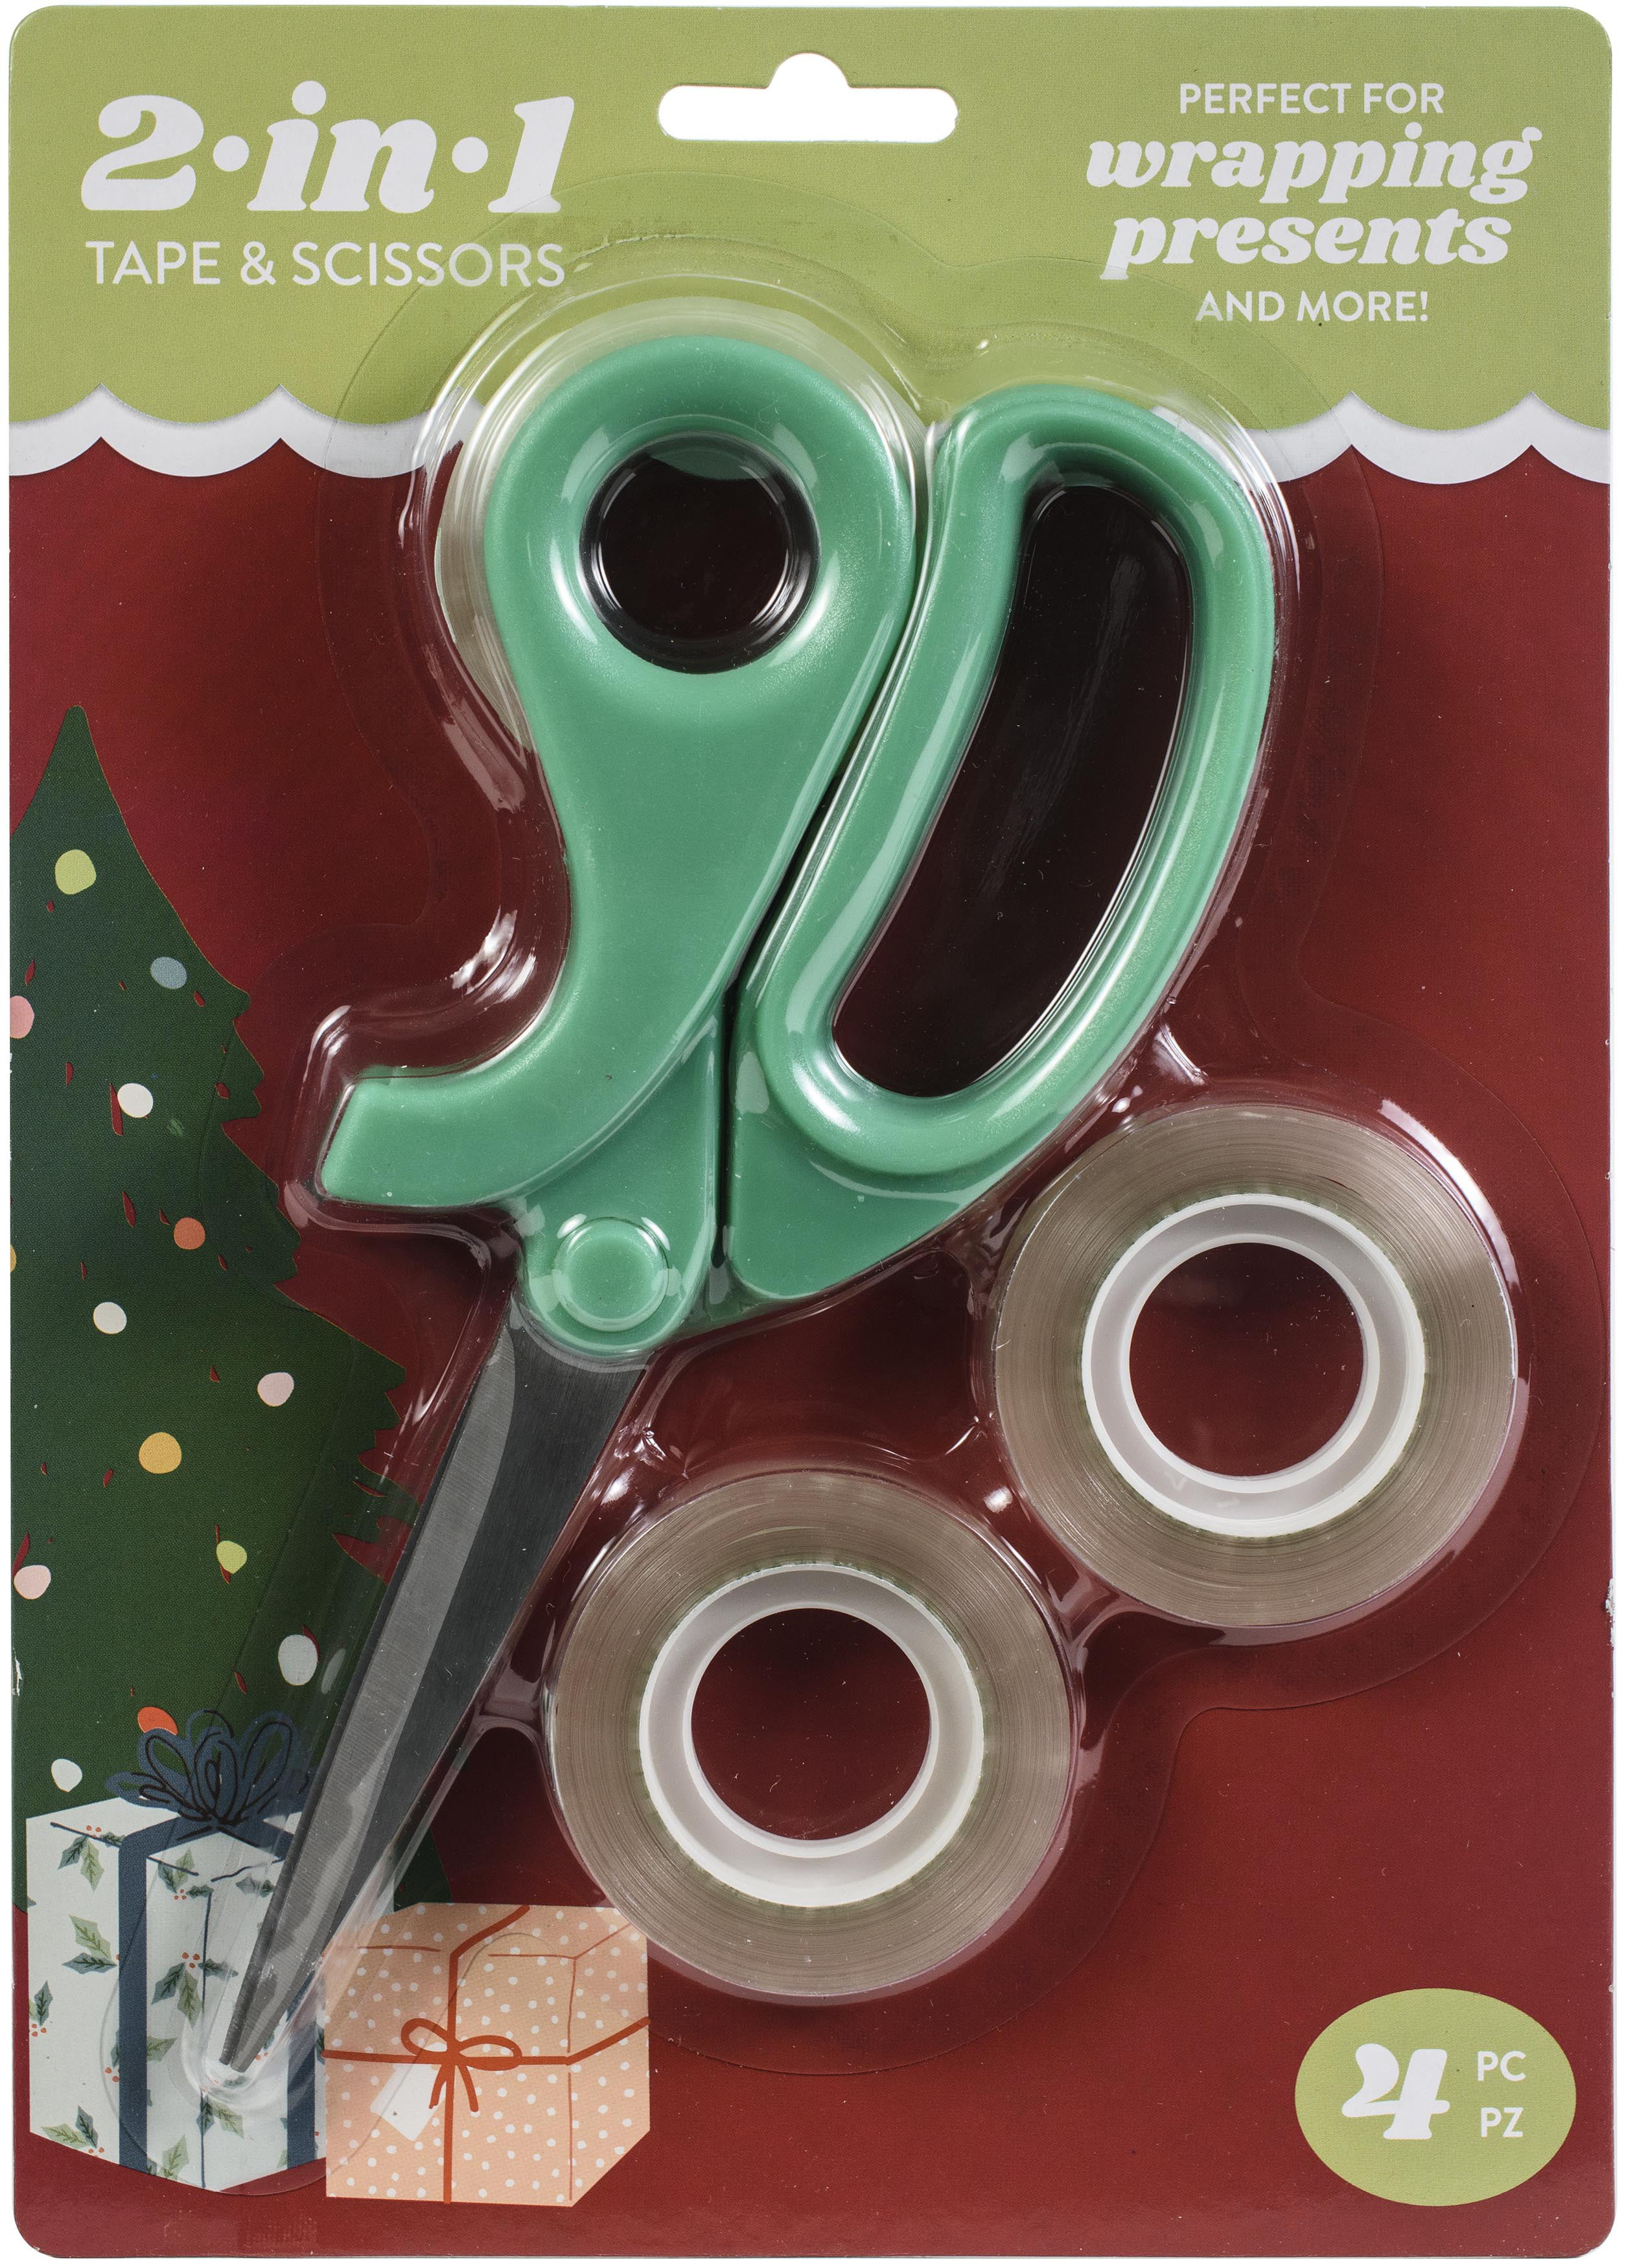 AC Gift Wrap Essentials Scissors and Tape 2-in-1 4/Pkg-Christmas